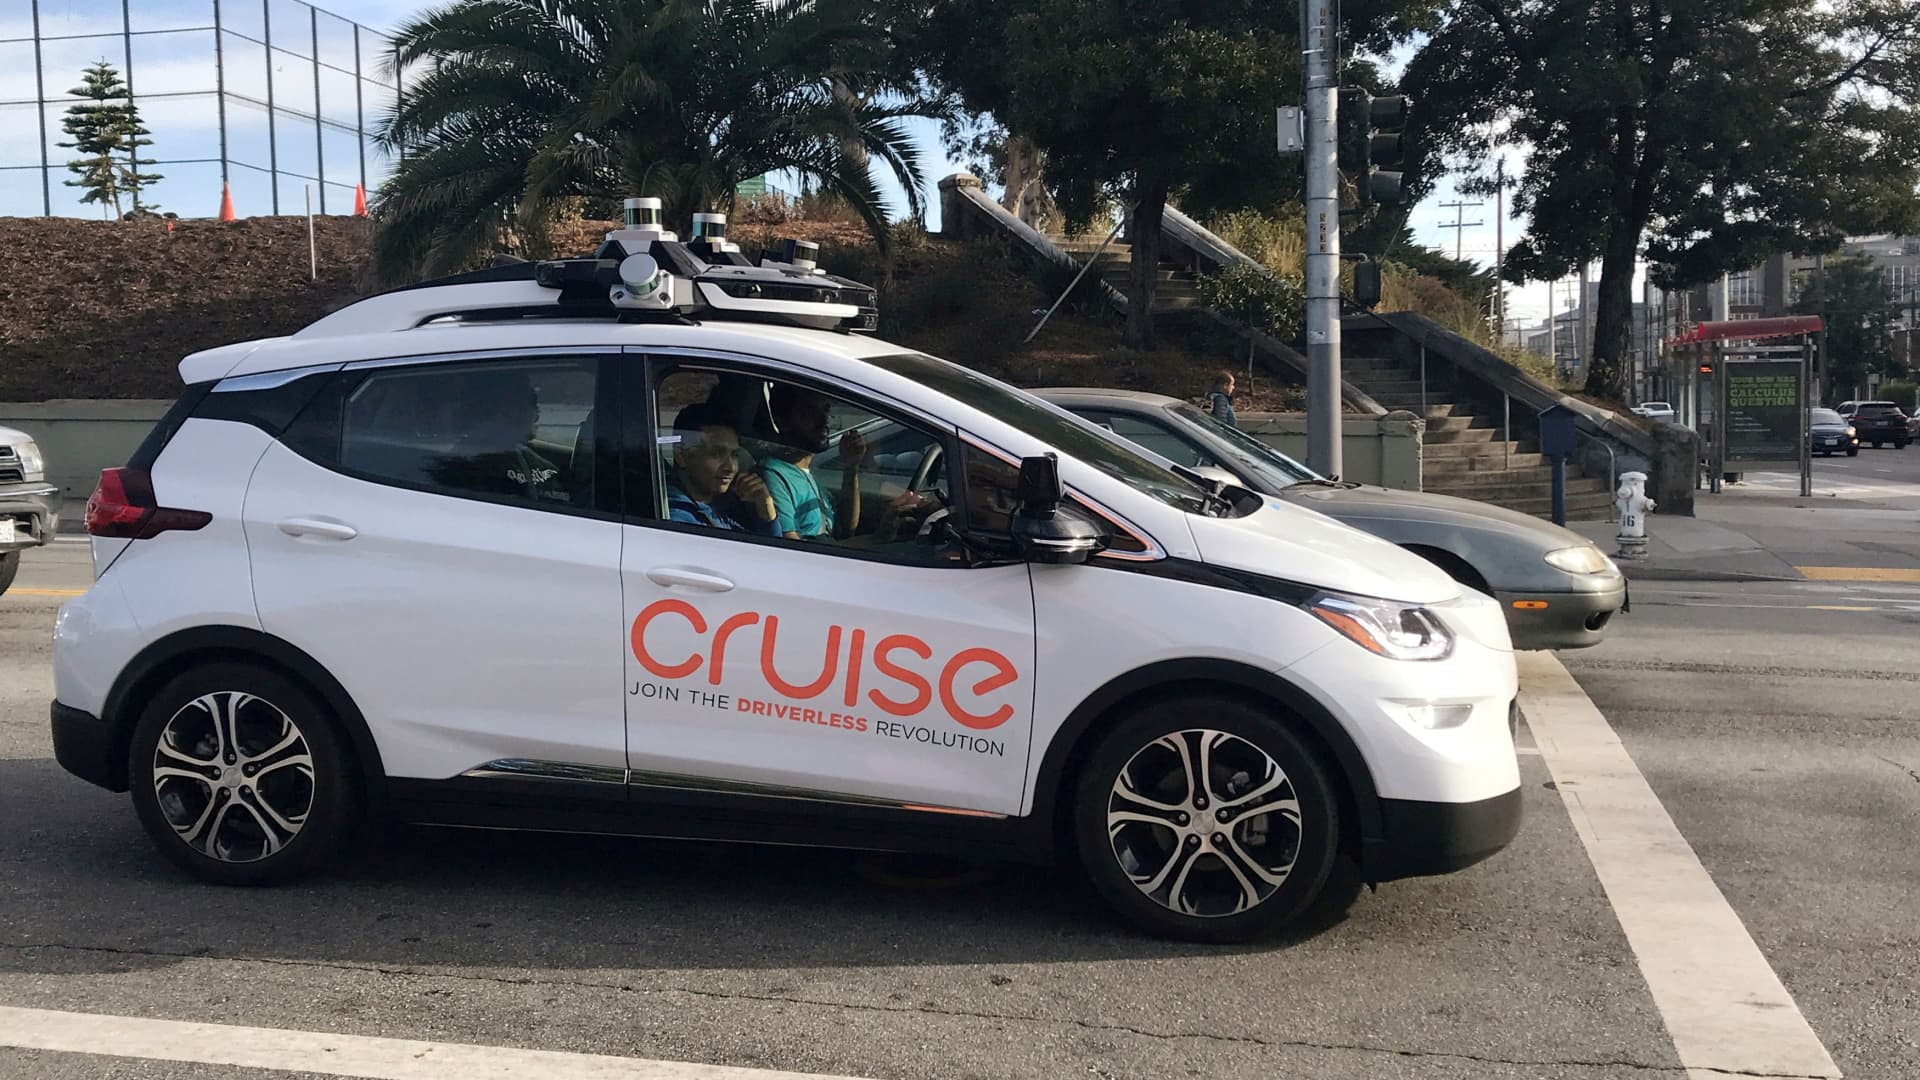 Cruise will reduce robotaxi fleet by 50% in San Francisco while California DMV investigates ‘incidents’